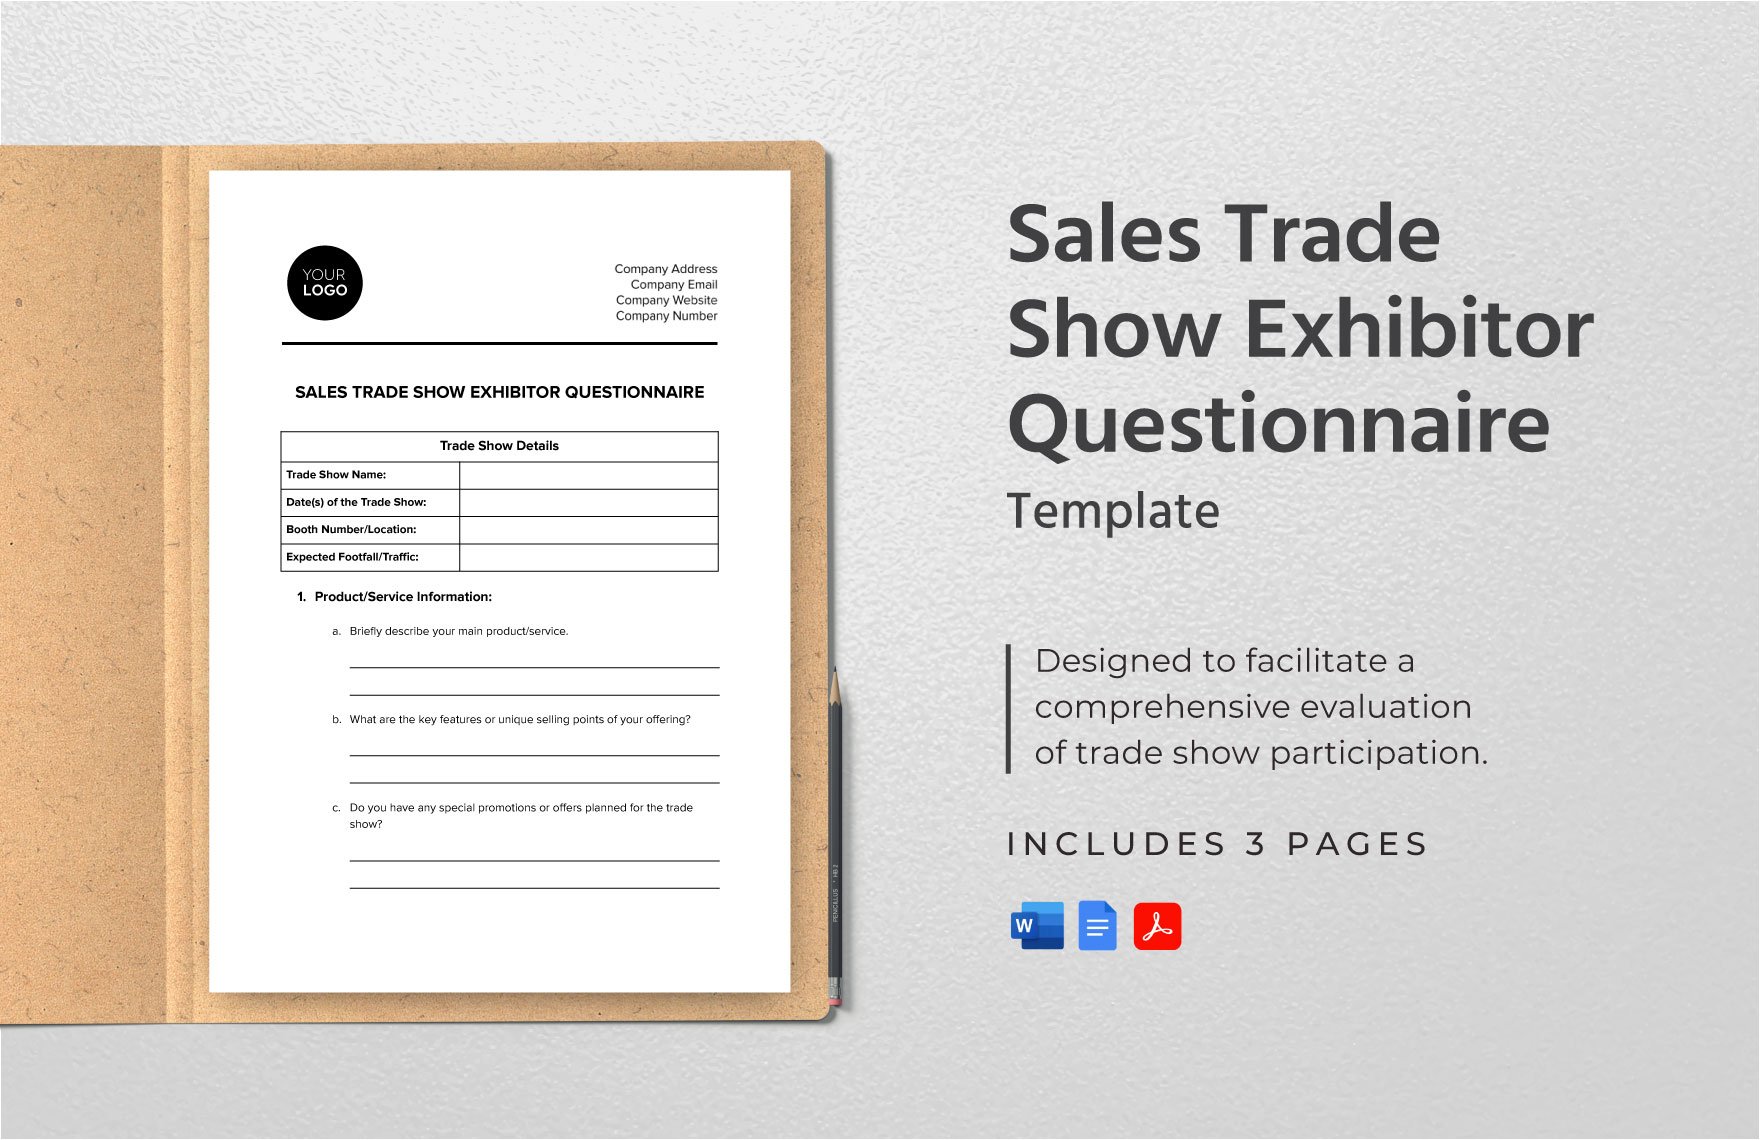 Sales Trade Show Exhibitor Questionnaire Template in Word, Google Docs, PDF